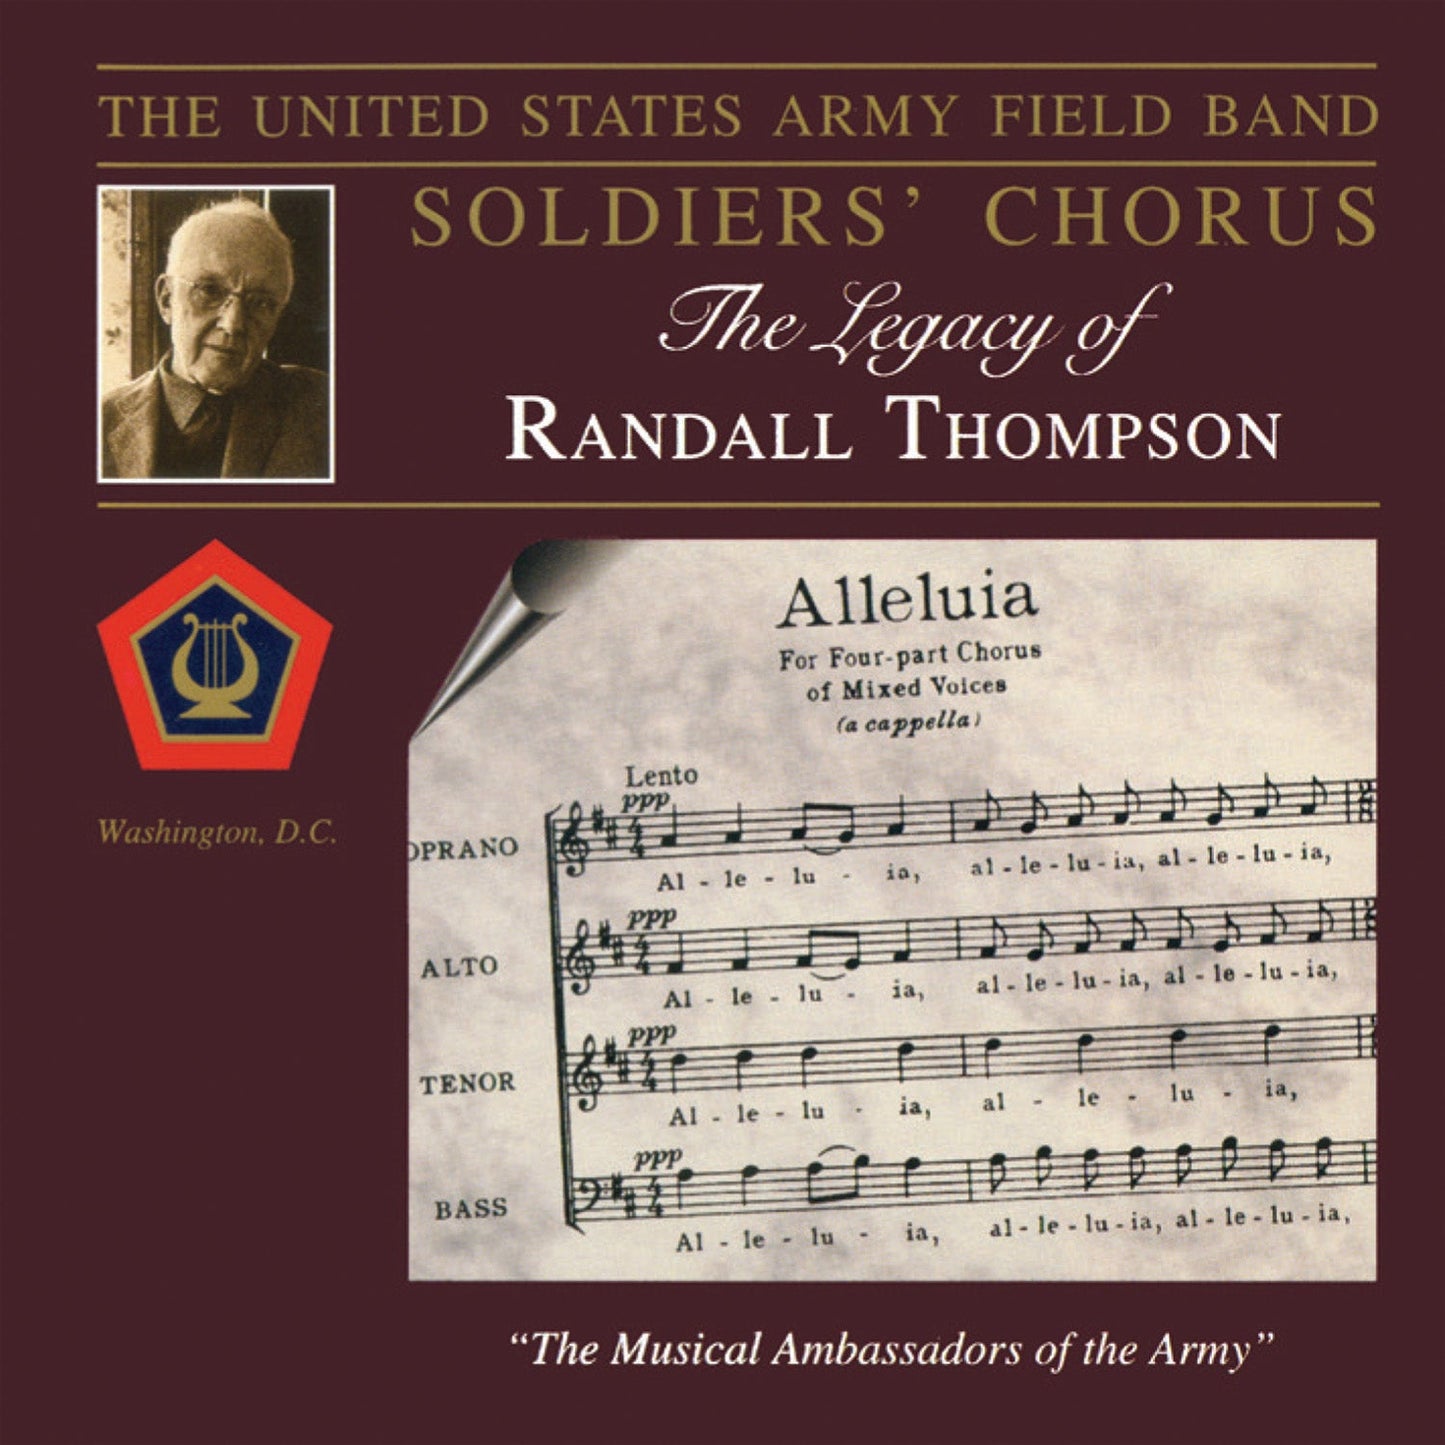 U.S. Army Field Band Soldier's Chorus: The Legacy of Randall Thompson